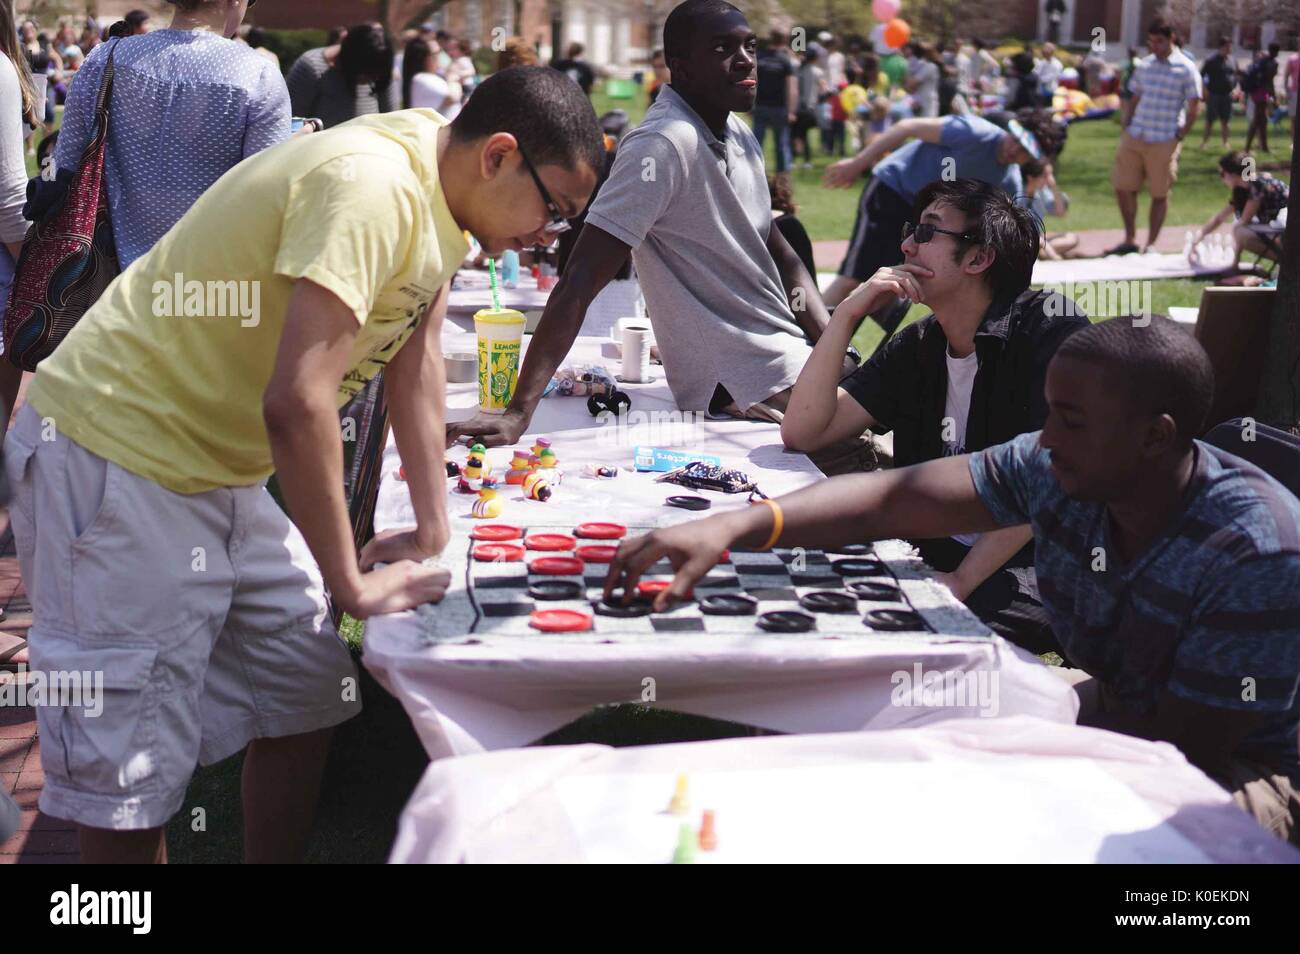 College students and members from the Johns Hopkins and Baltimore communities play games at stations set up for Spring Fair, an annual festival with music, food, shopping, and more that takes place every spring on the Homewood campus of the Johns Hopkins University in Baltimore, Maryland, 2014. Courtesy Eric Chen. Stock Photo